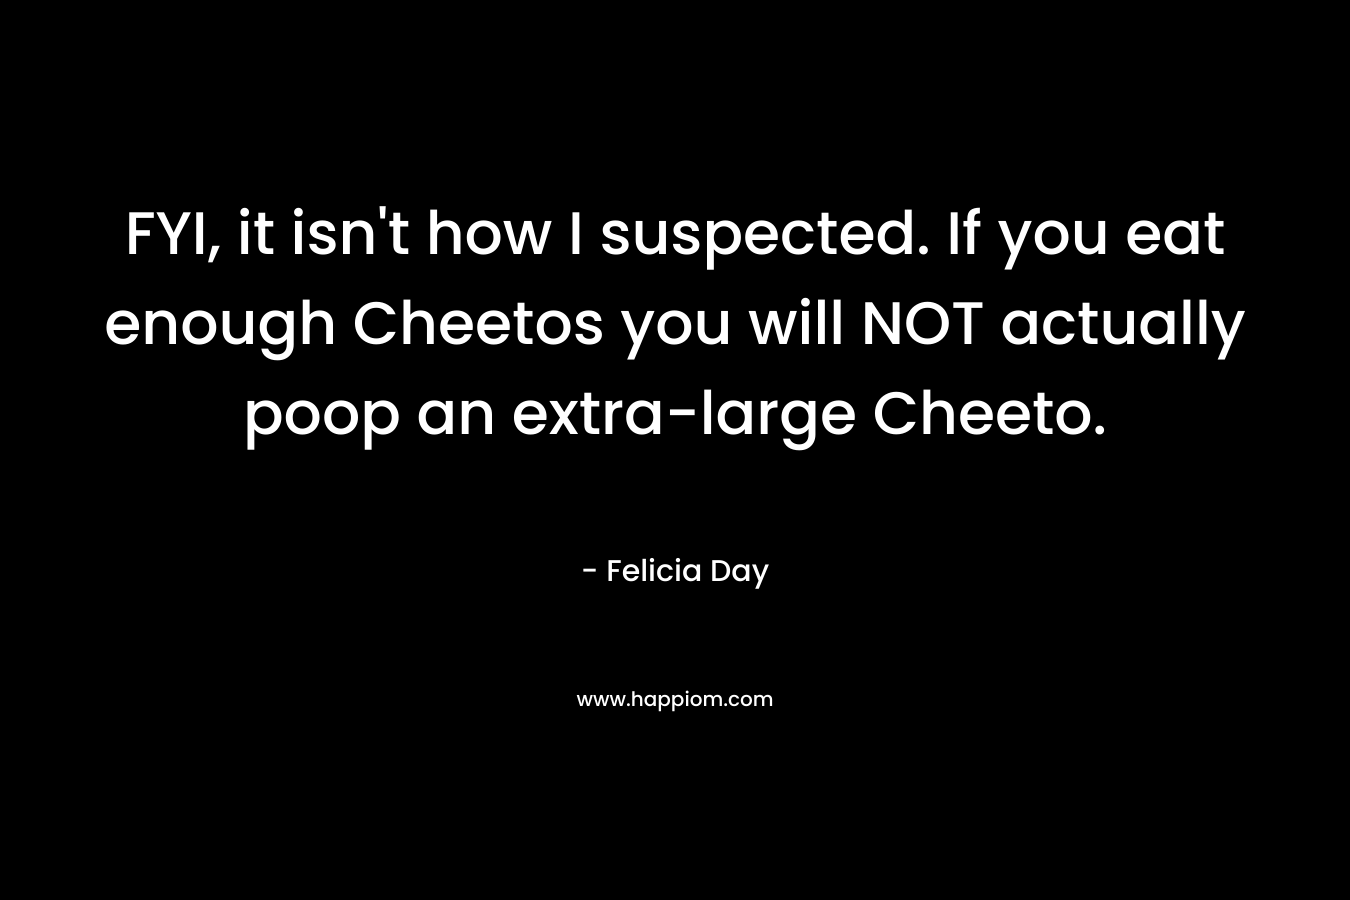 FYI, it isn’t how I suspected. If you eat enough Cheetos you will NOT actually poop an extra-large Cheeto. – Felicia Day